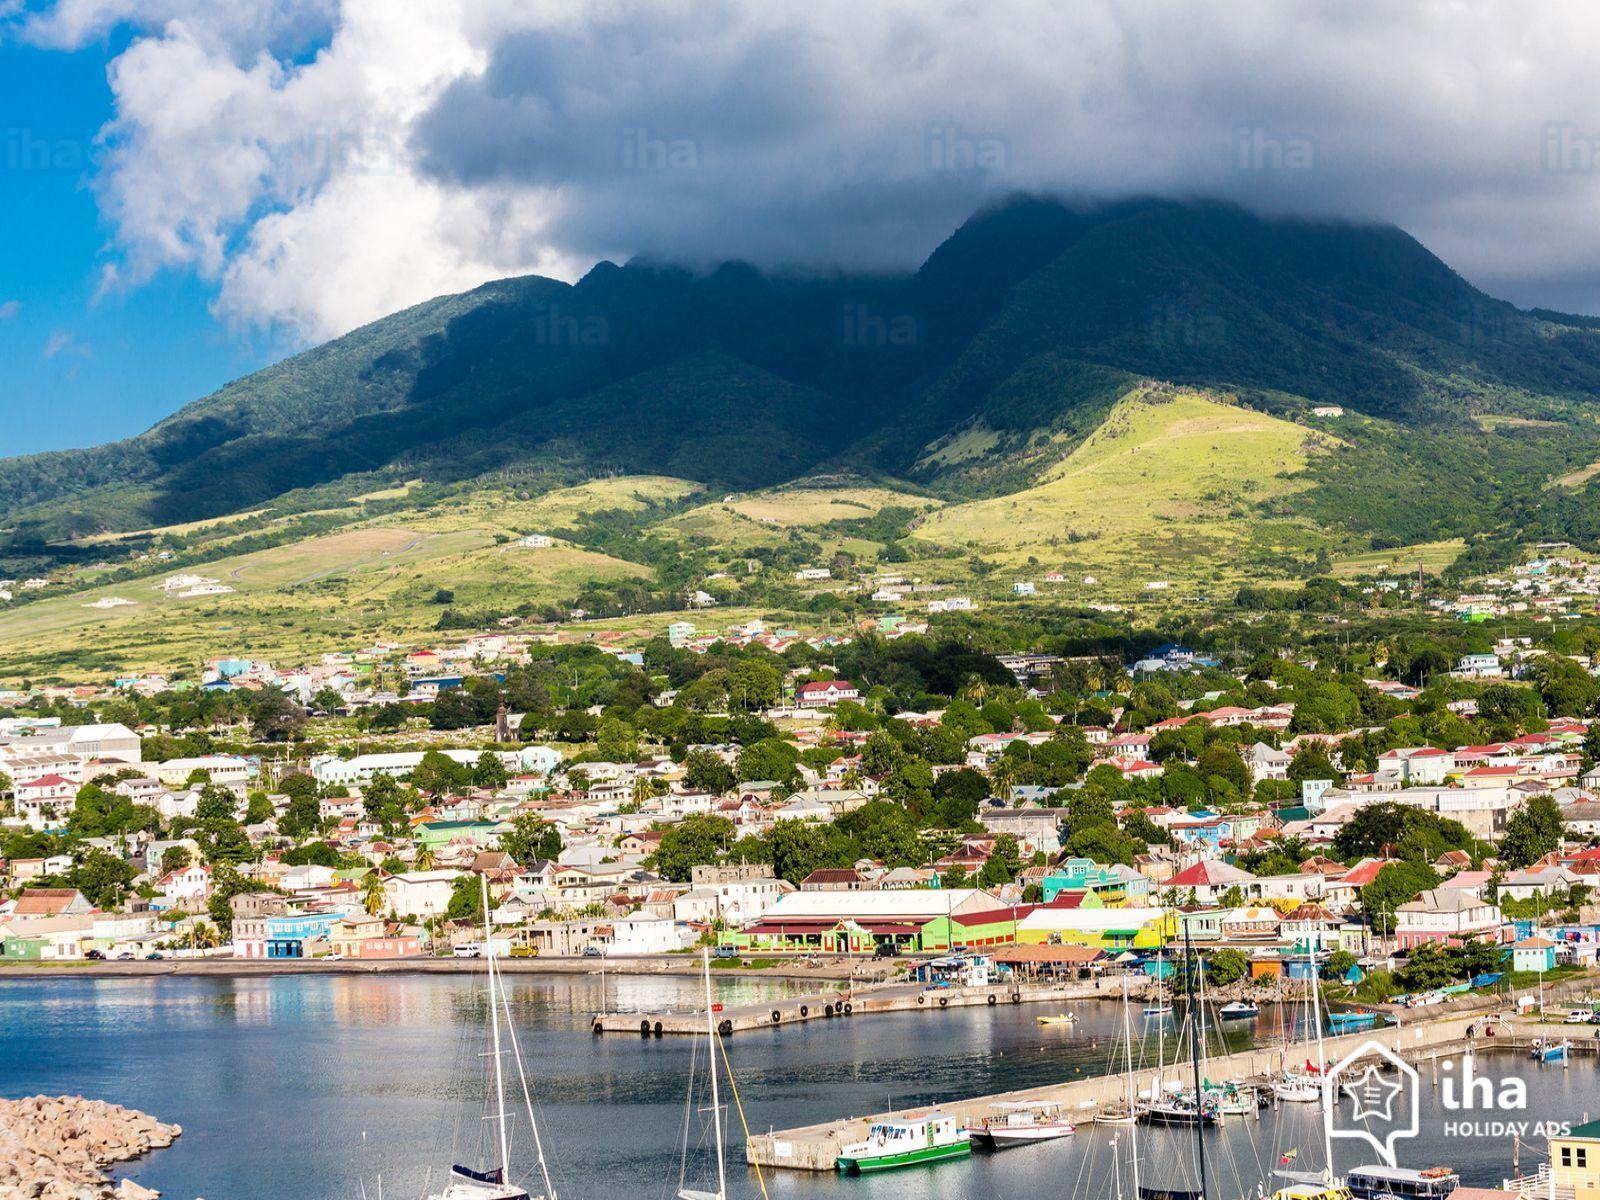 Saint Kitts and Nevis countries Videos Image WebSites